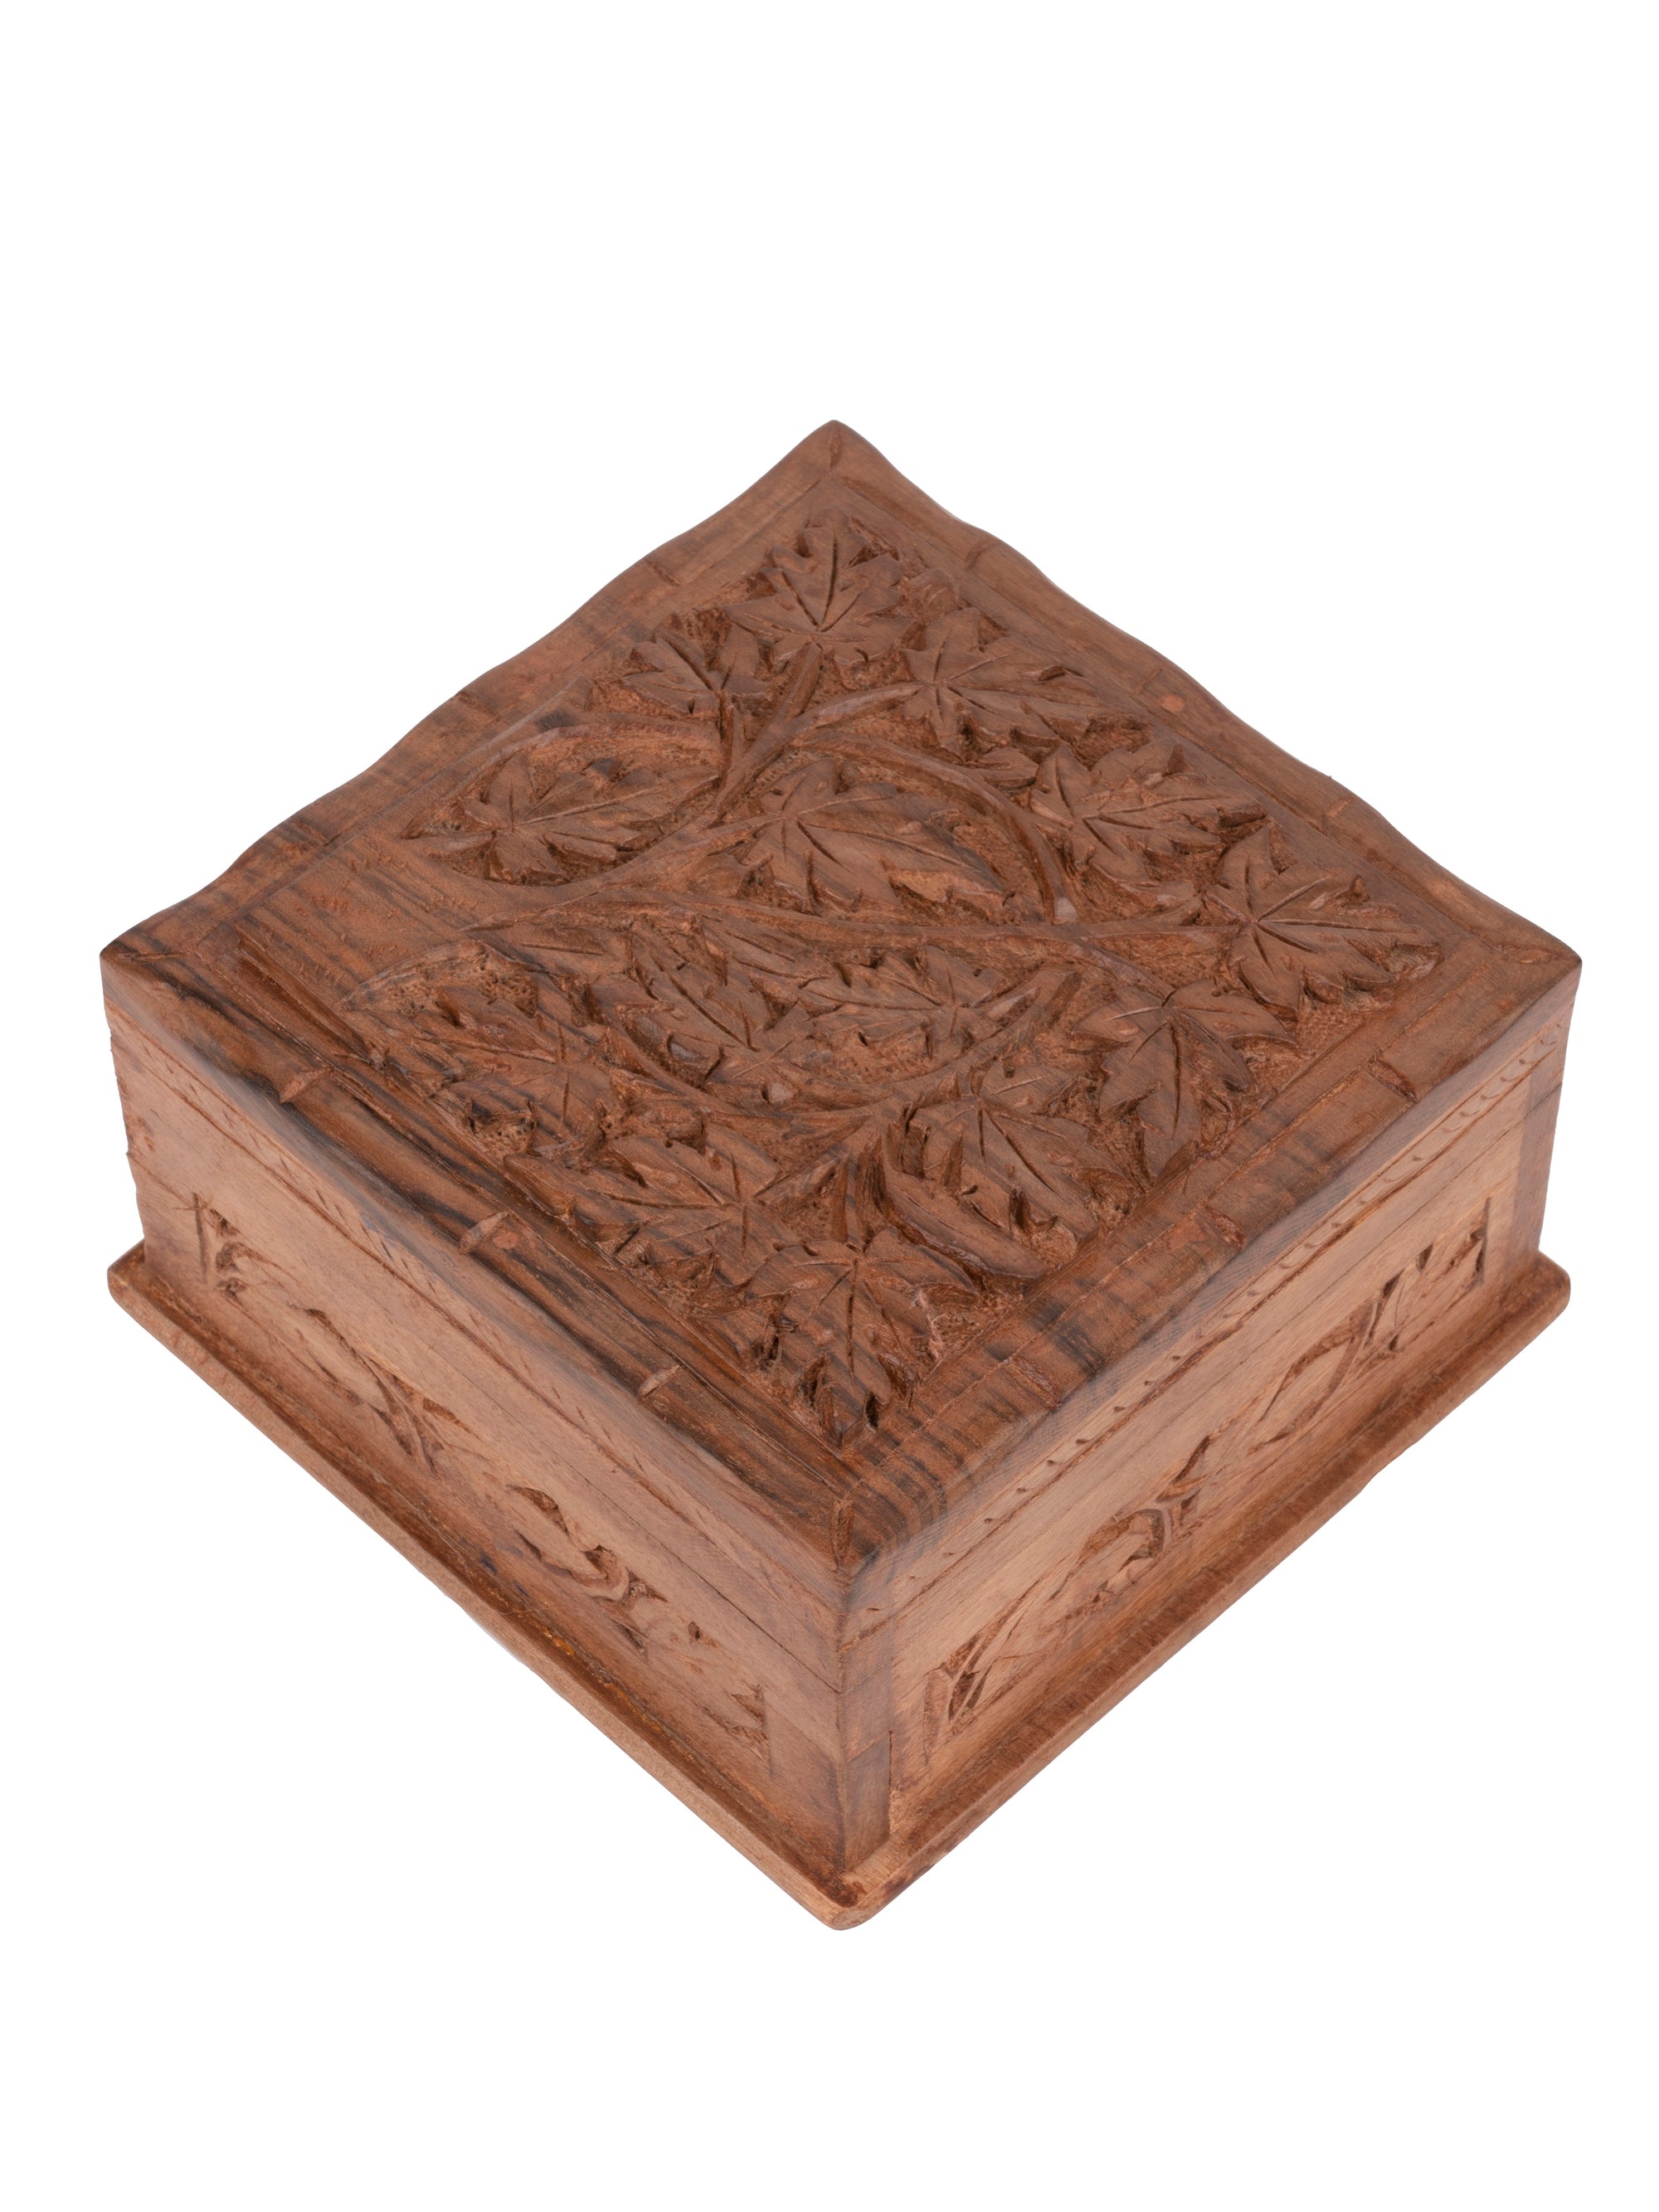 Walnut wood Square Jewellery box with Maple leaves carving on top - 5x5 inches - The Heritage Artifacts